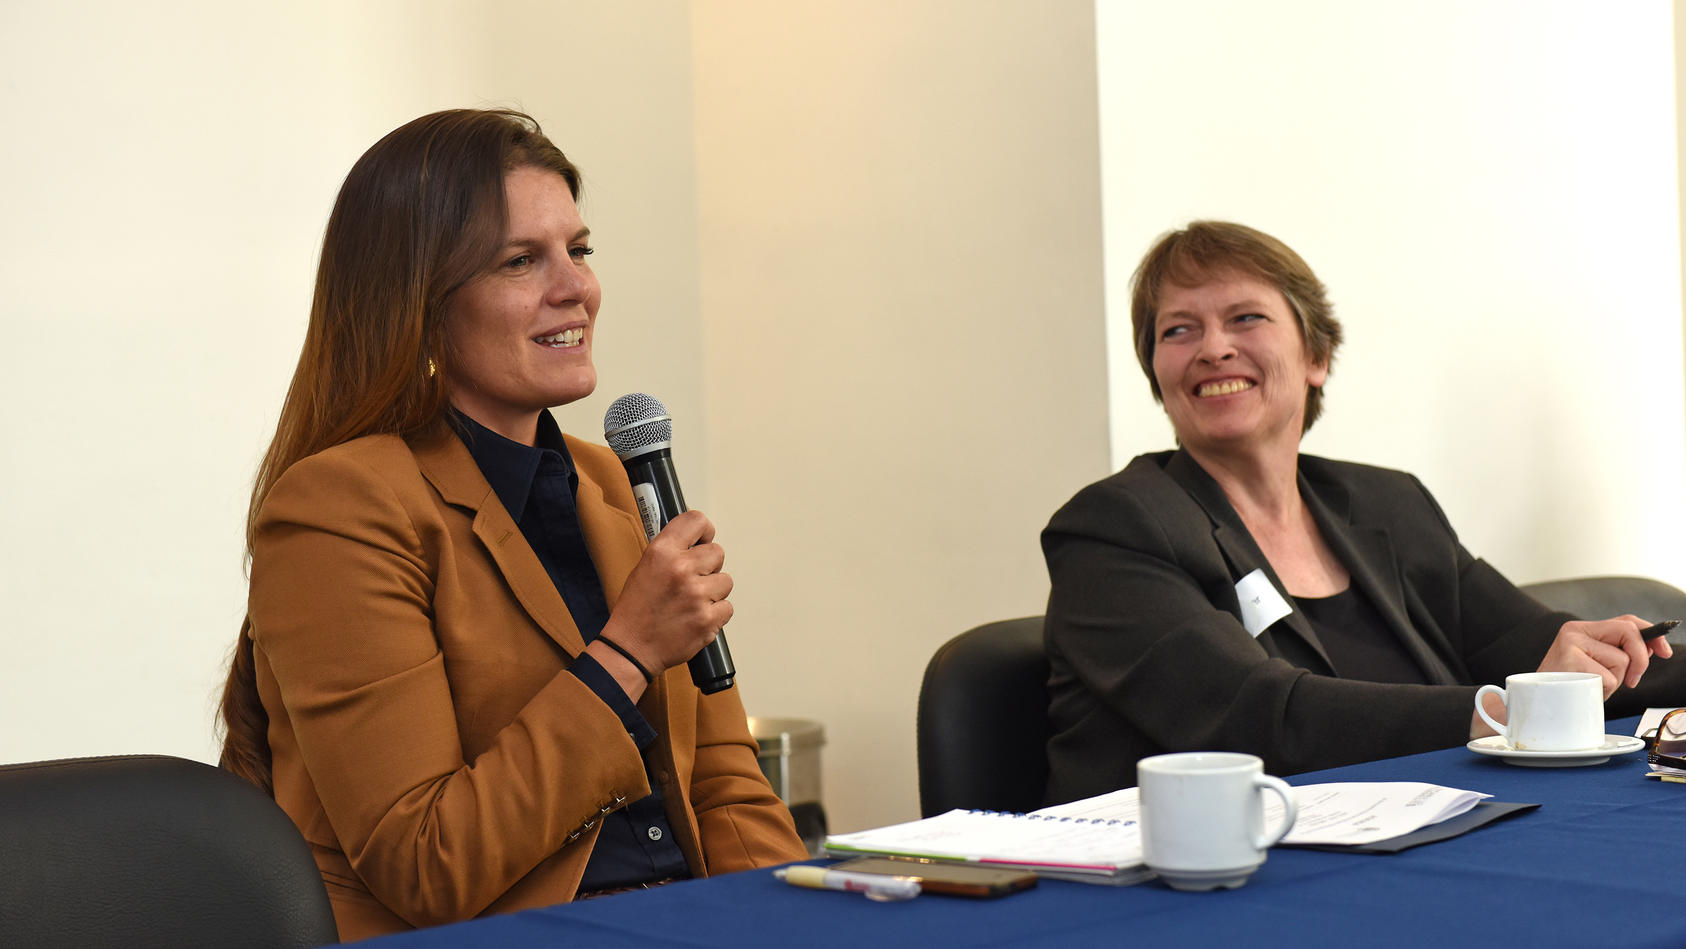 Hillery Midkiff and Ginny Bouvier, Colombia Network of Women Mediators